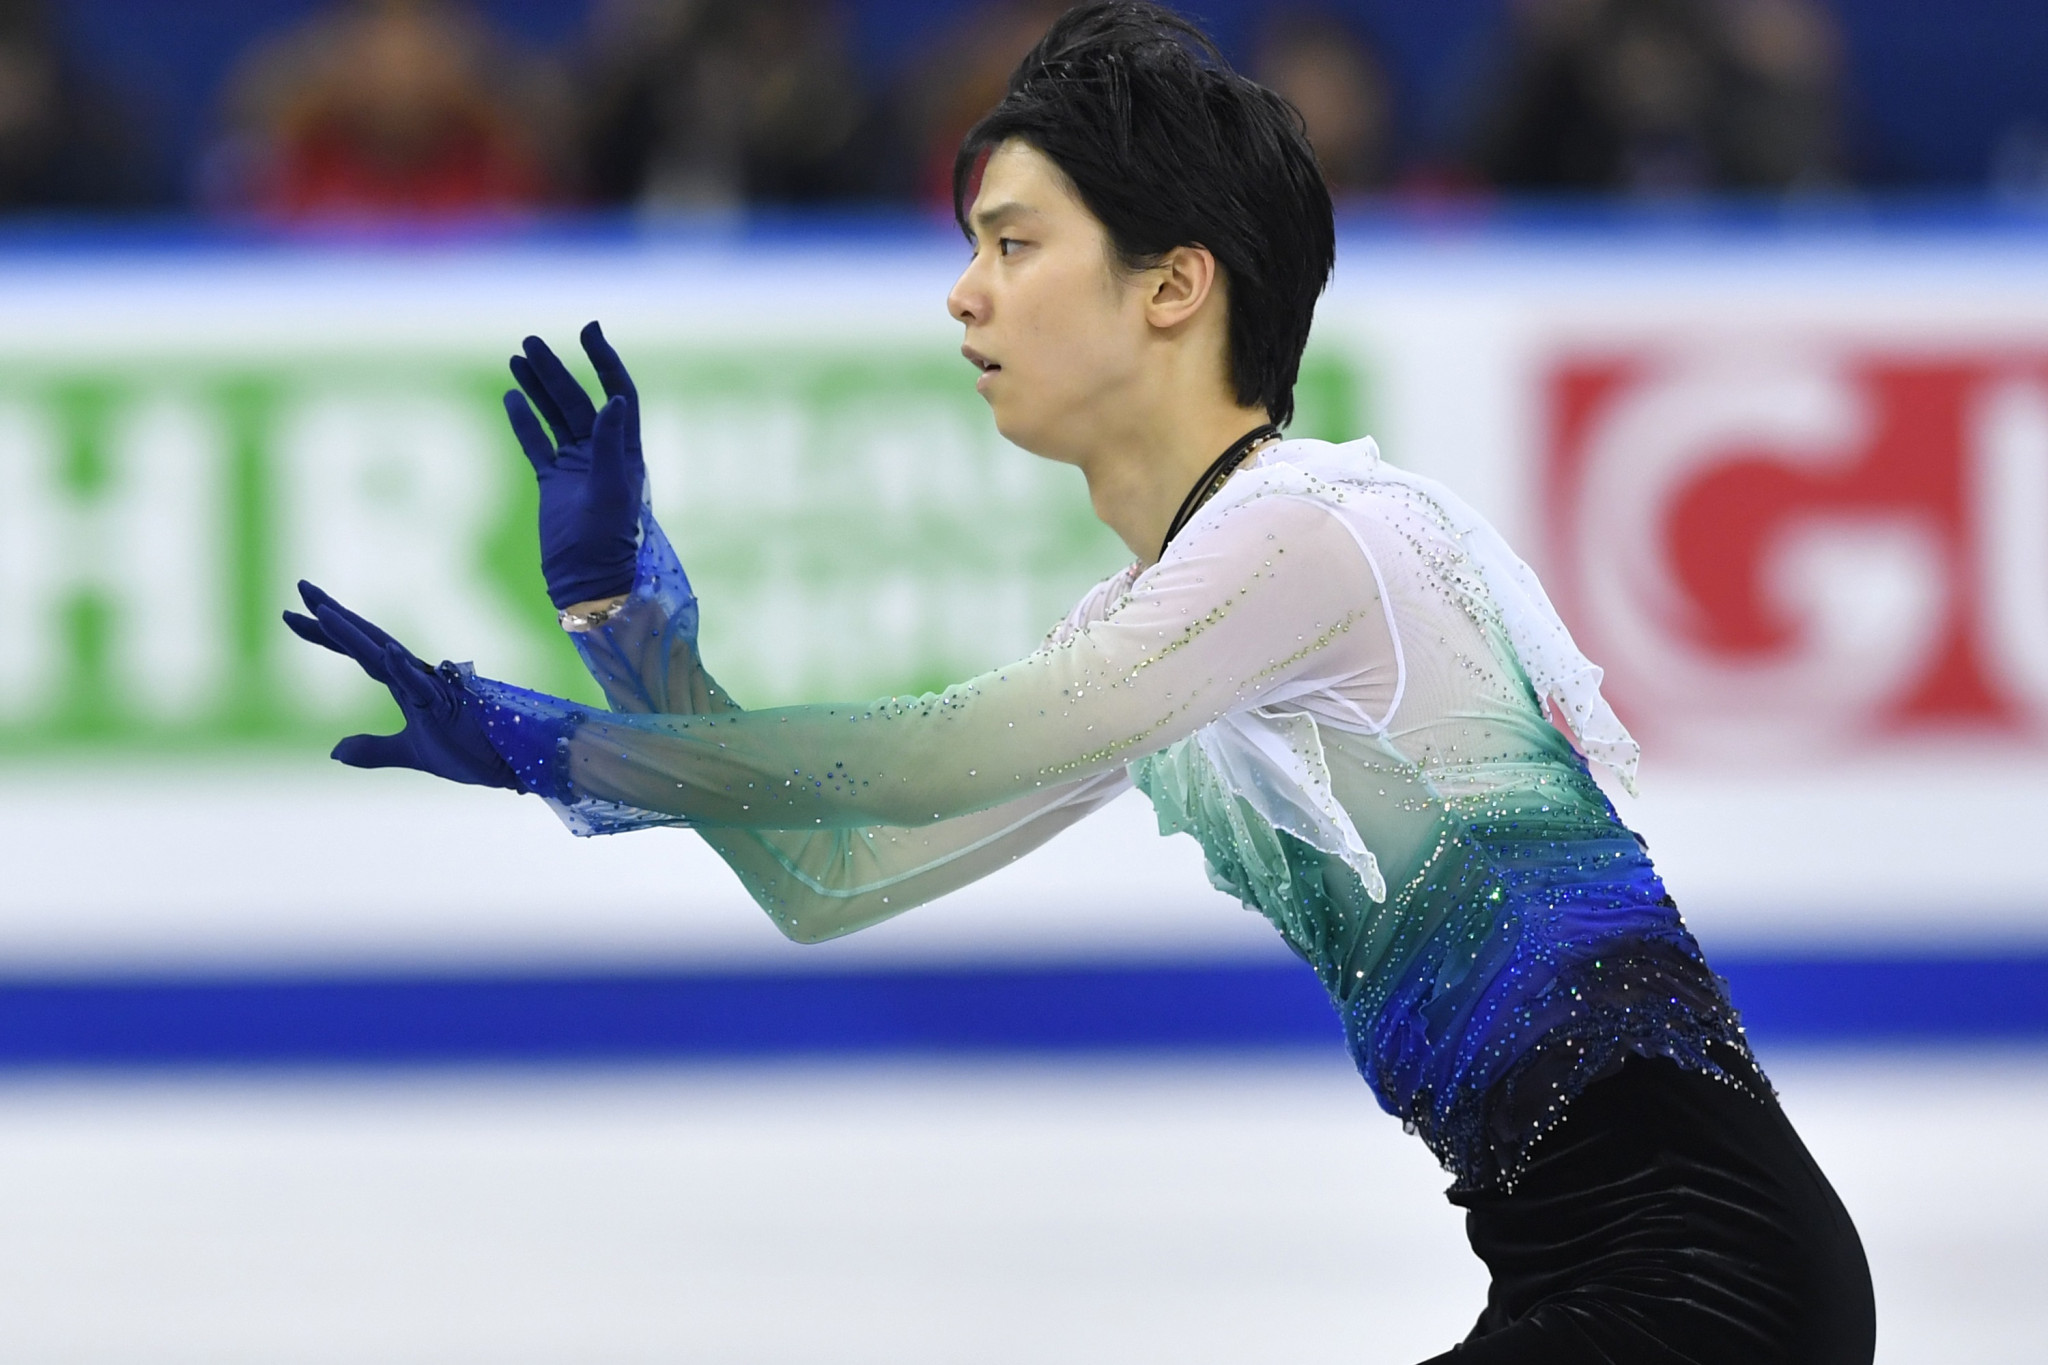 Japan's Olympic champion Yuzuru Hanyu has had to withdraw from the men's event due to injury ©Getty Images